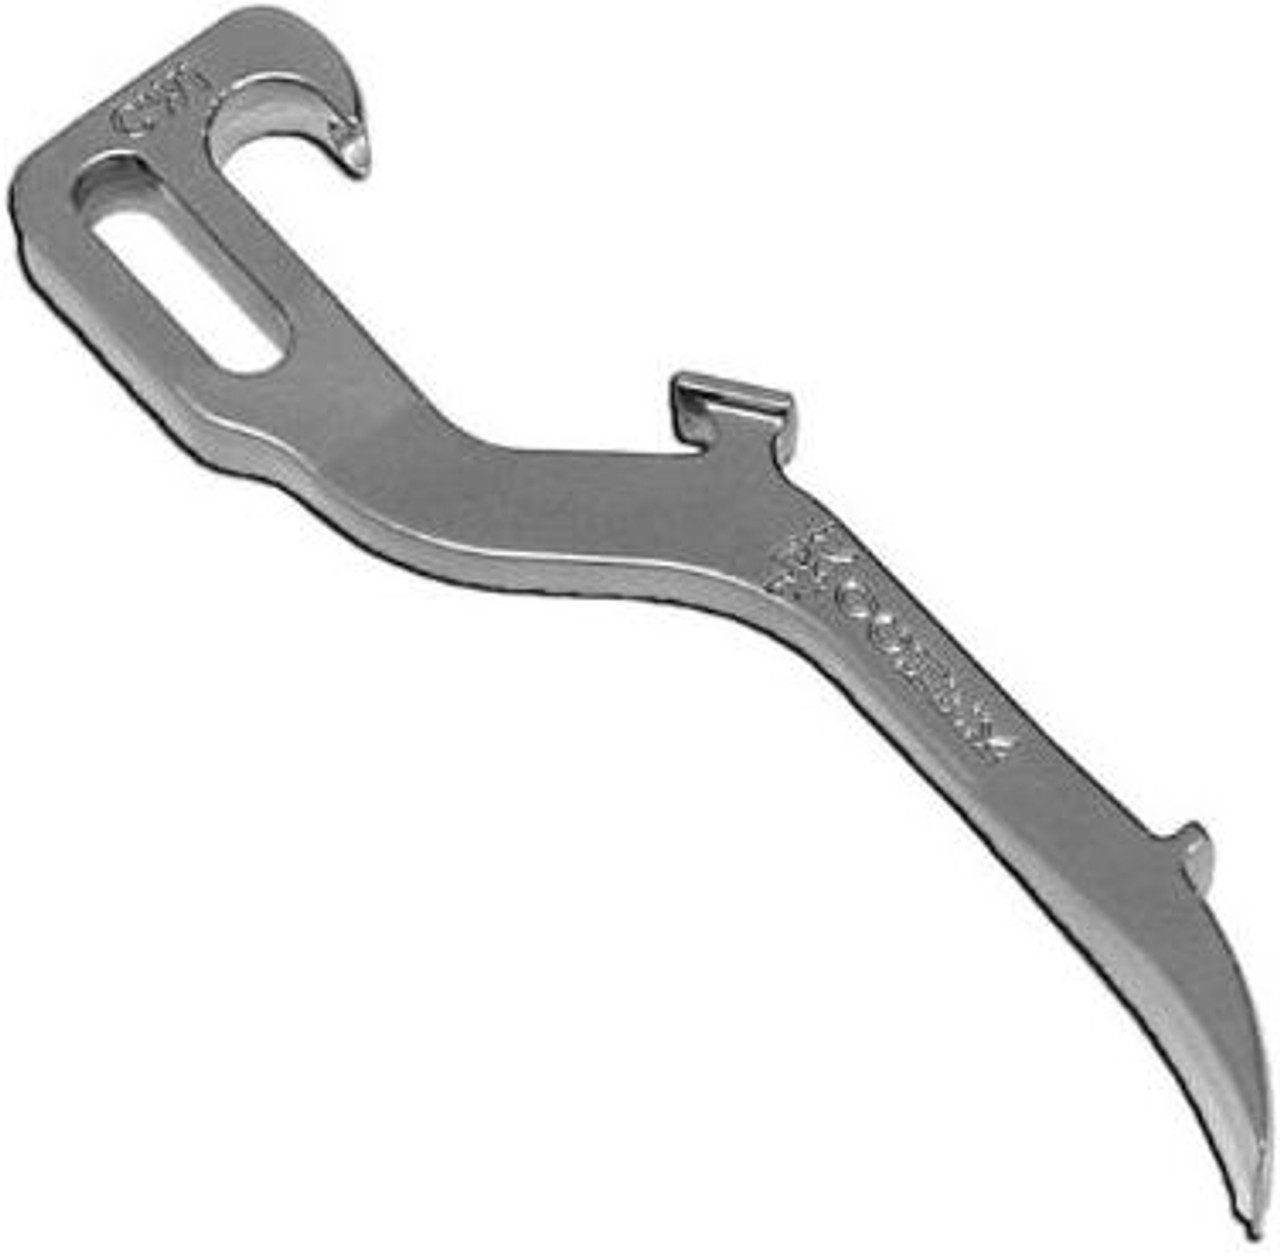 Spanner Wrench Set